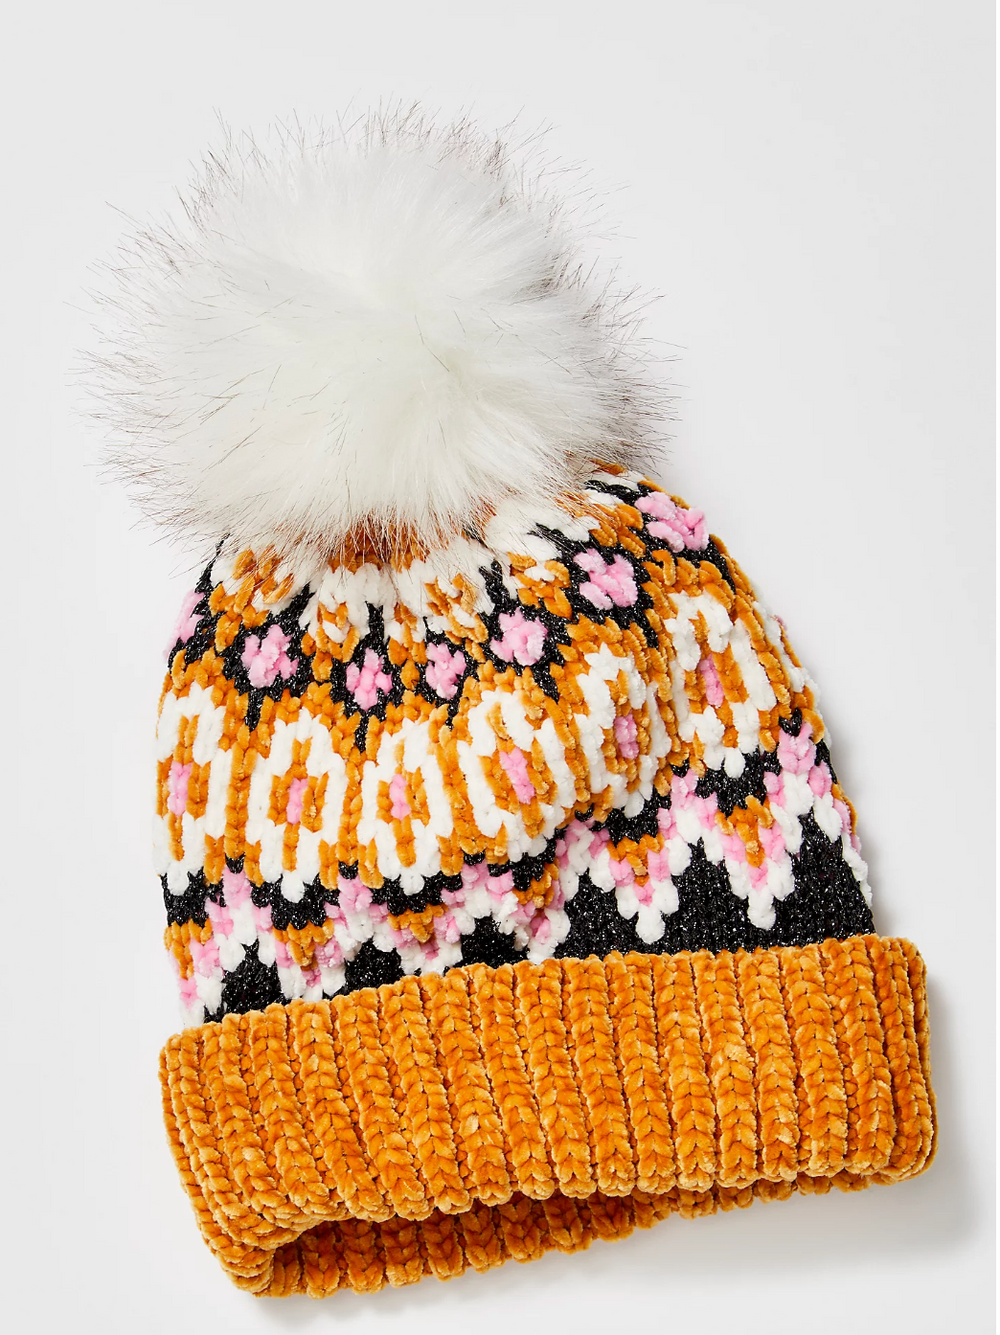 Free People CHALET FAIRISLE hand knit Winter Snow Hat beanie with pom pom Mustard and Black